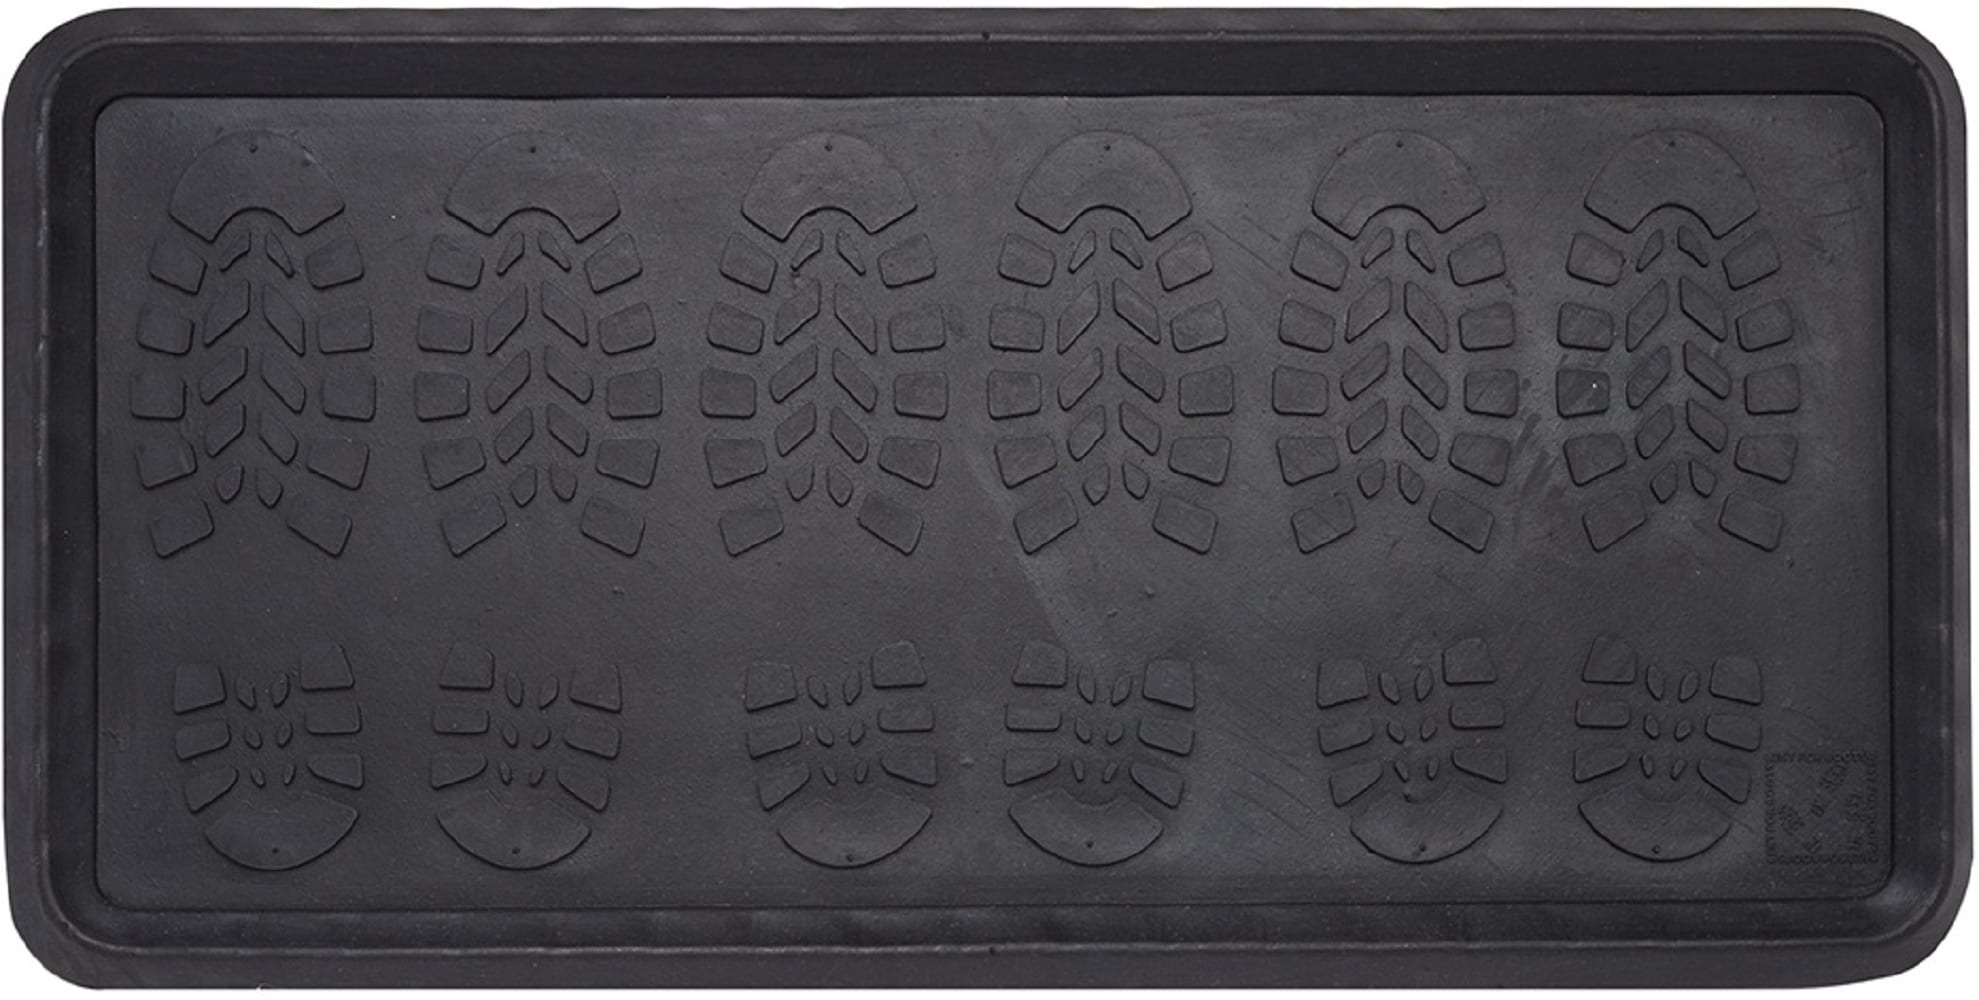 Rubber Boot Tray - Lee Valley Tools